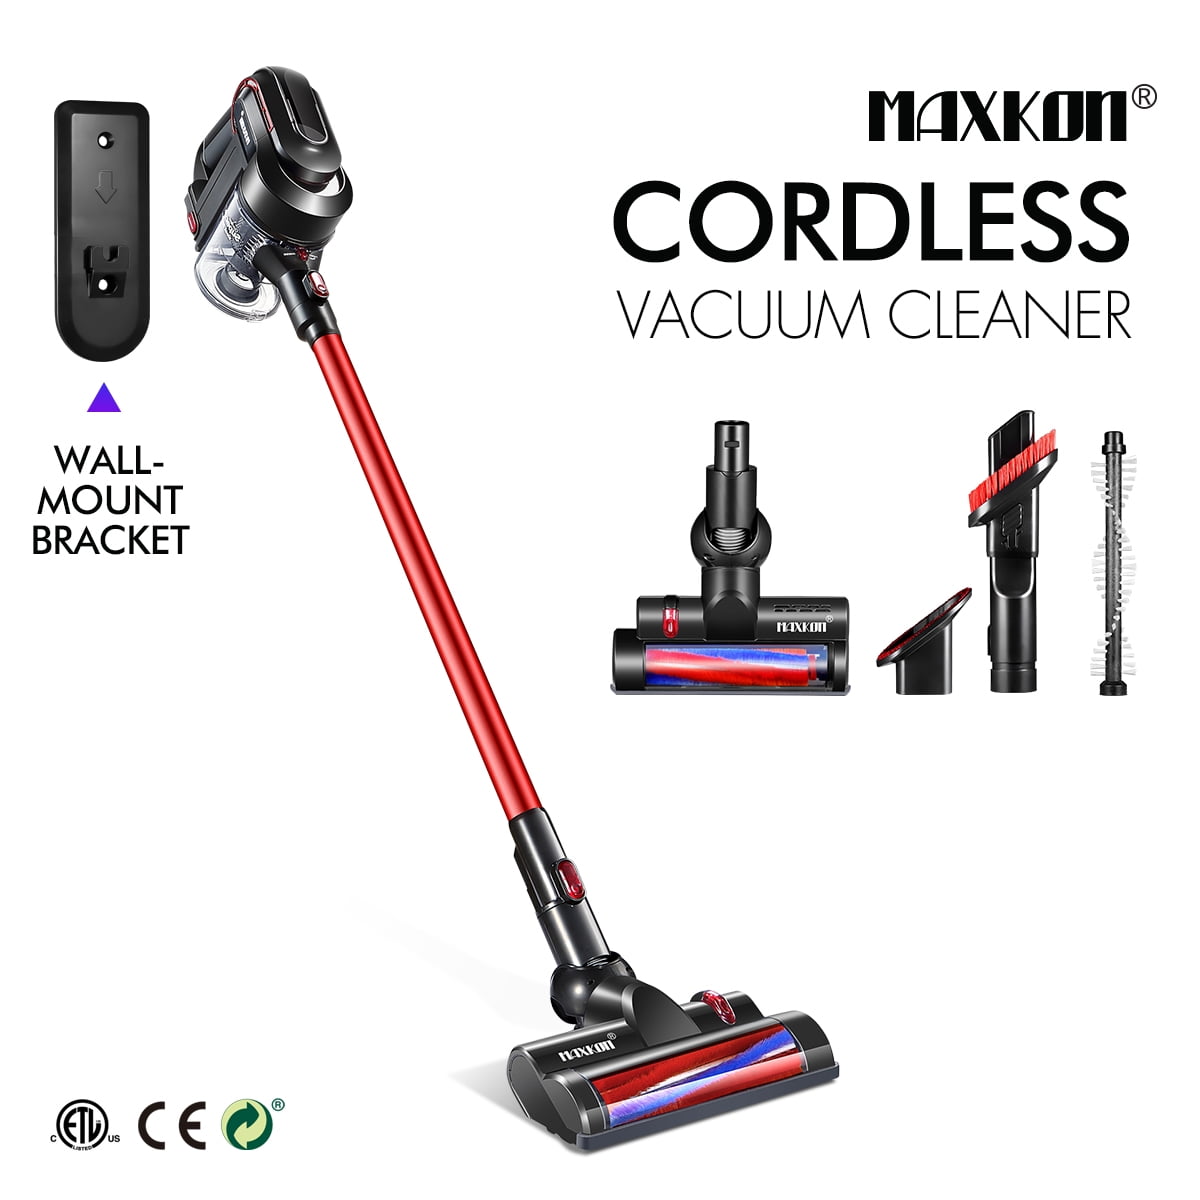 Senli Lightweight High Efficiency Powerful Digital Motor Brushes,LED Portable 4 in 1 Stick Vacuums & Electric Brooms for Household Floors Curtains Sofas Etc Handheld Cordless Vacuum Cleaner 